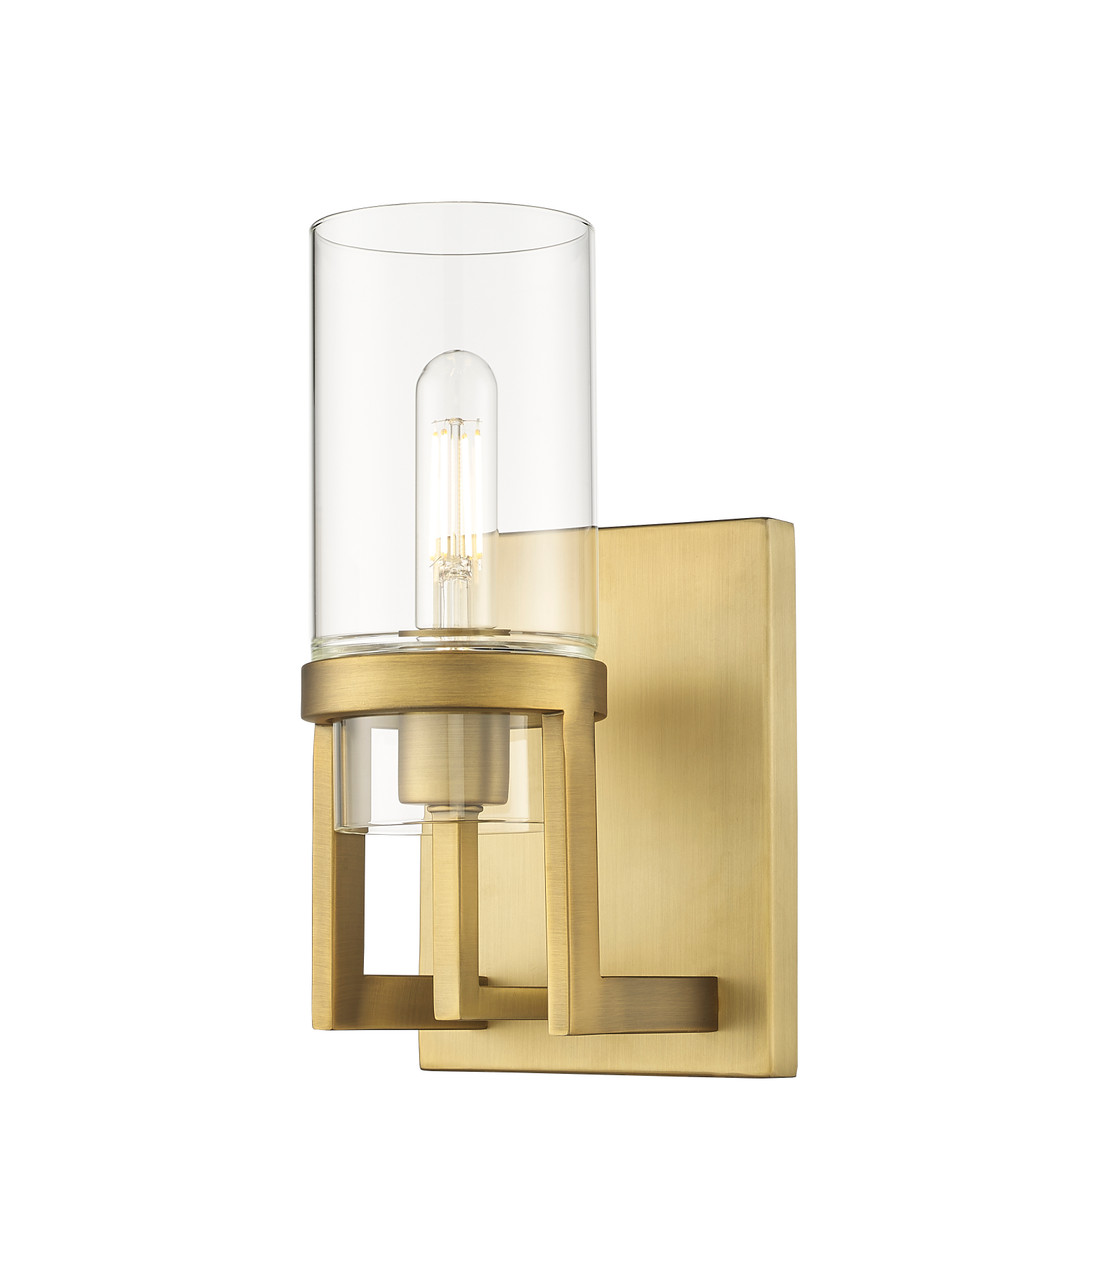 INNOVATIONS 426-1W-BB-G426-8CL Utopia 1 4.75 inch Sconce Brushed Brass